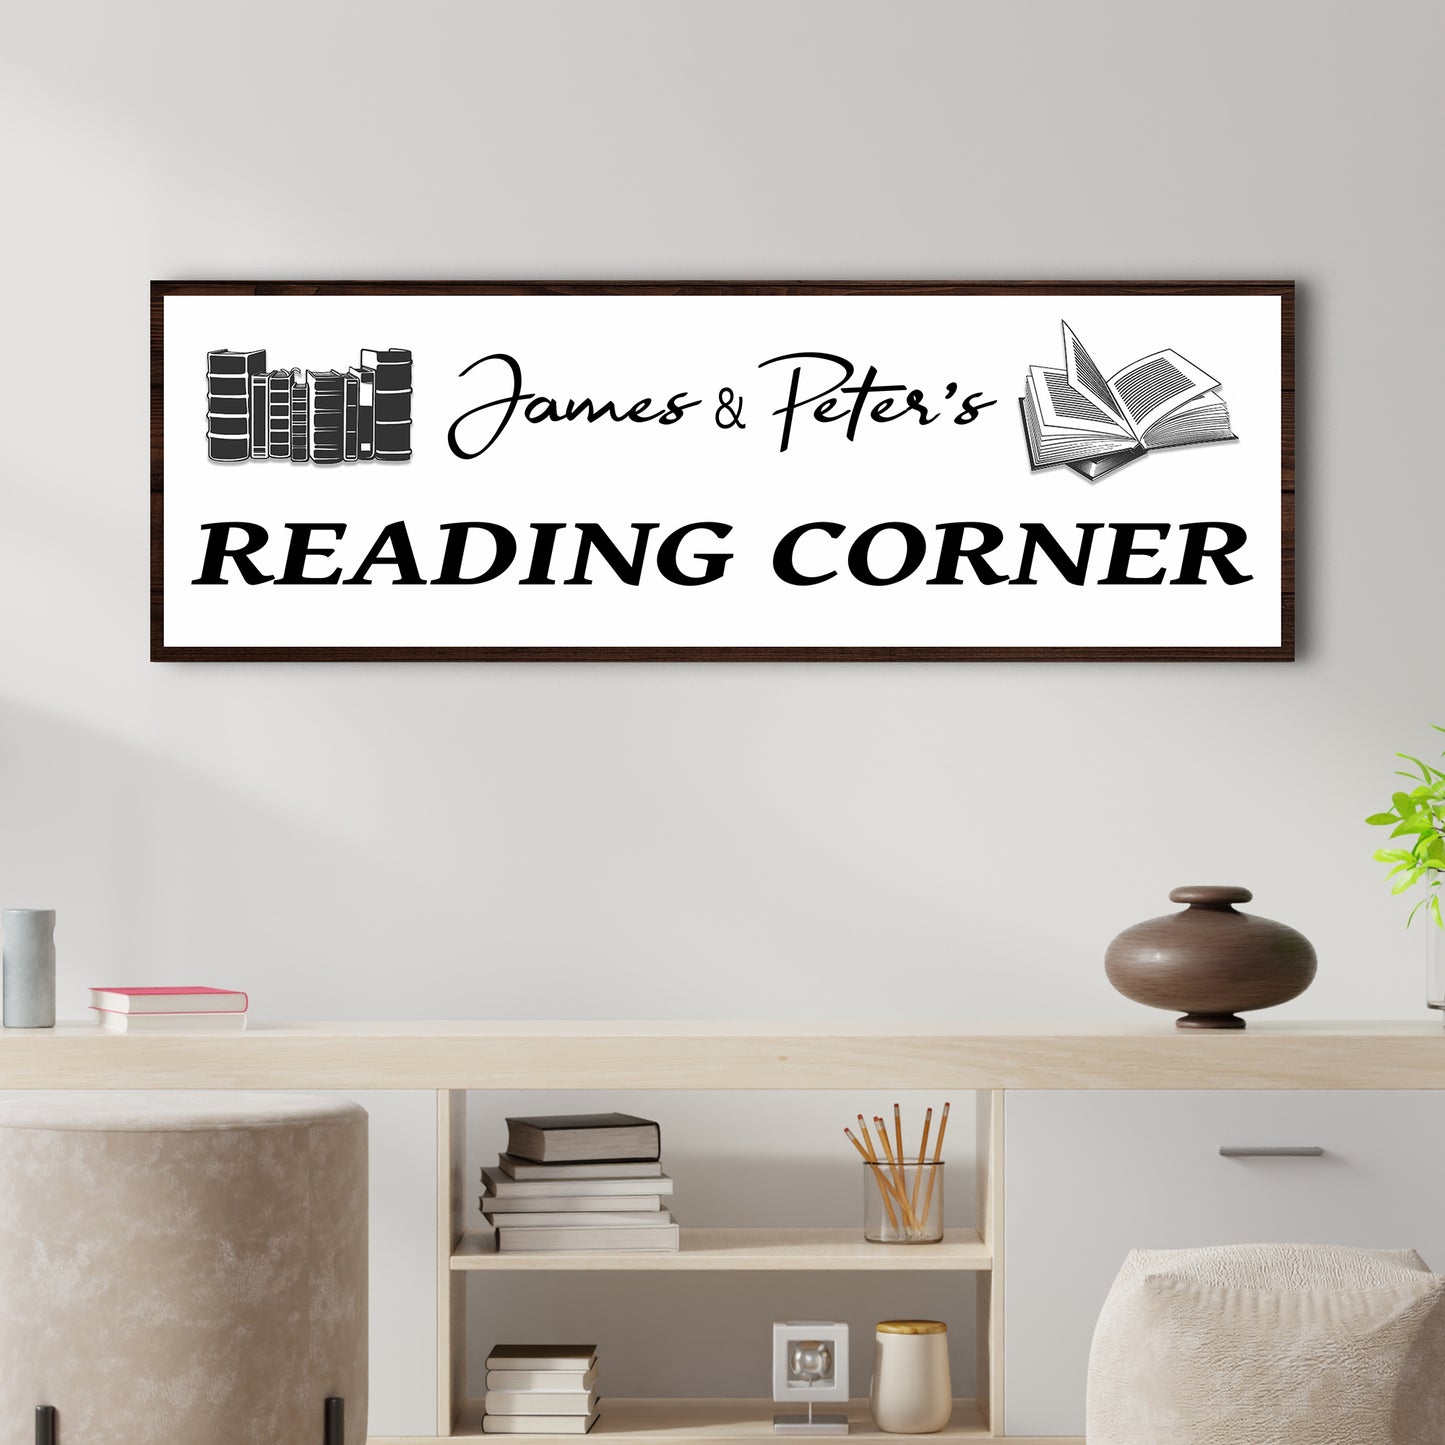 Reading Corner Sign  - Image by Tailored Canvases